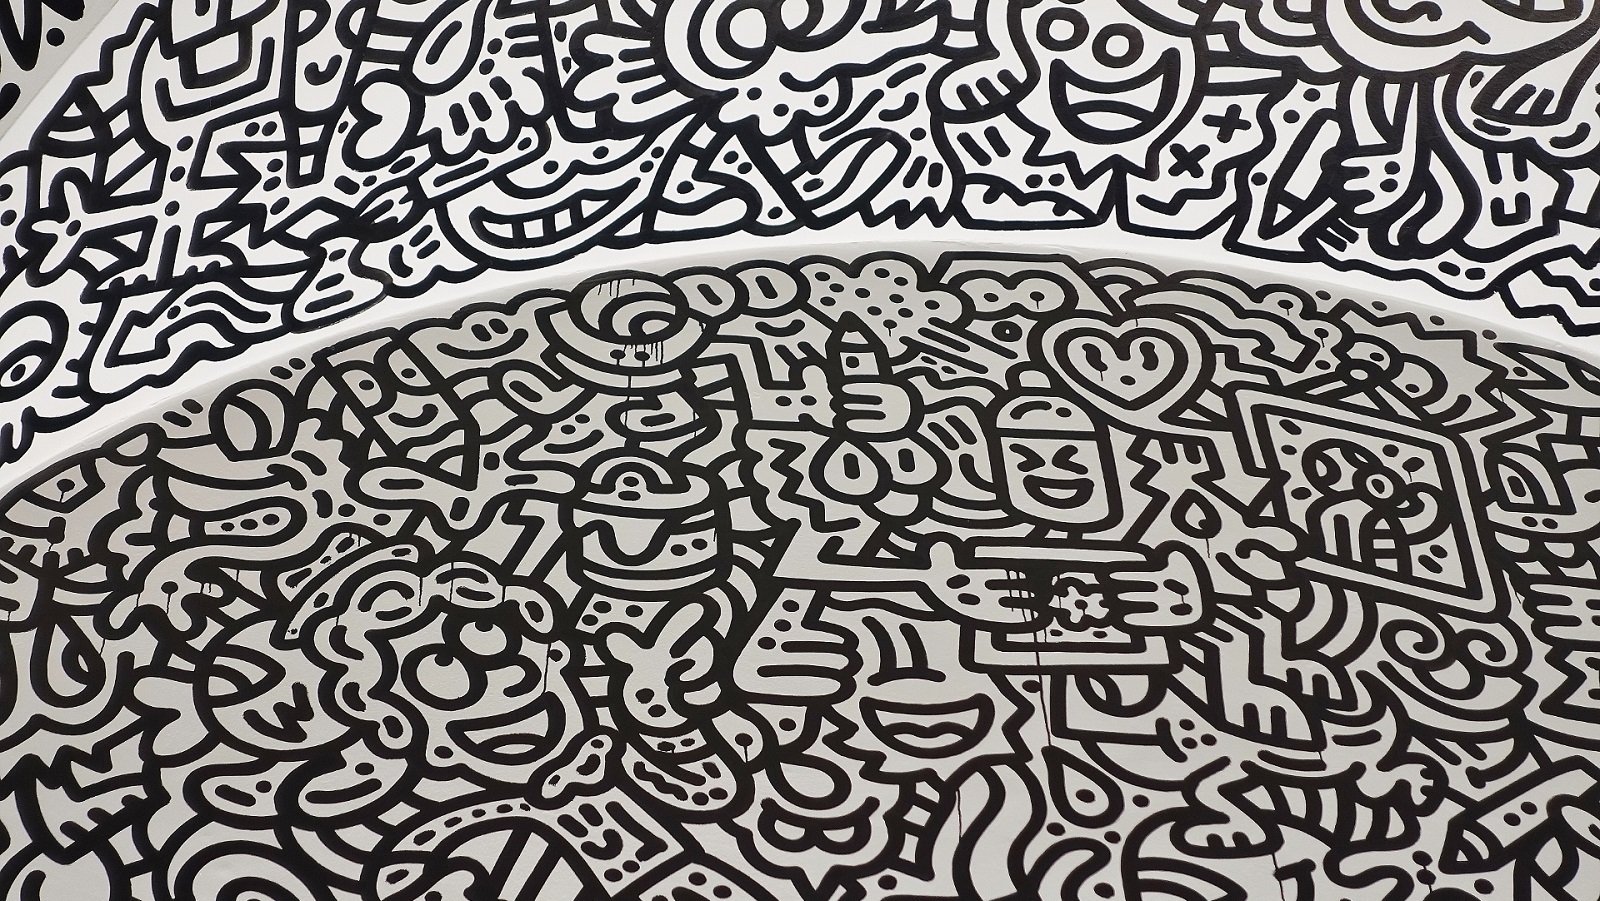 Mr Doodle drawings on part of the ceiling dome in an art gallery, using black paint on a white wall. The doodles are large and thick with motifs like robots, squiggles and hearts. Paint drips in some sections.